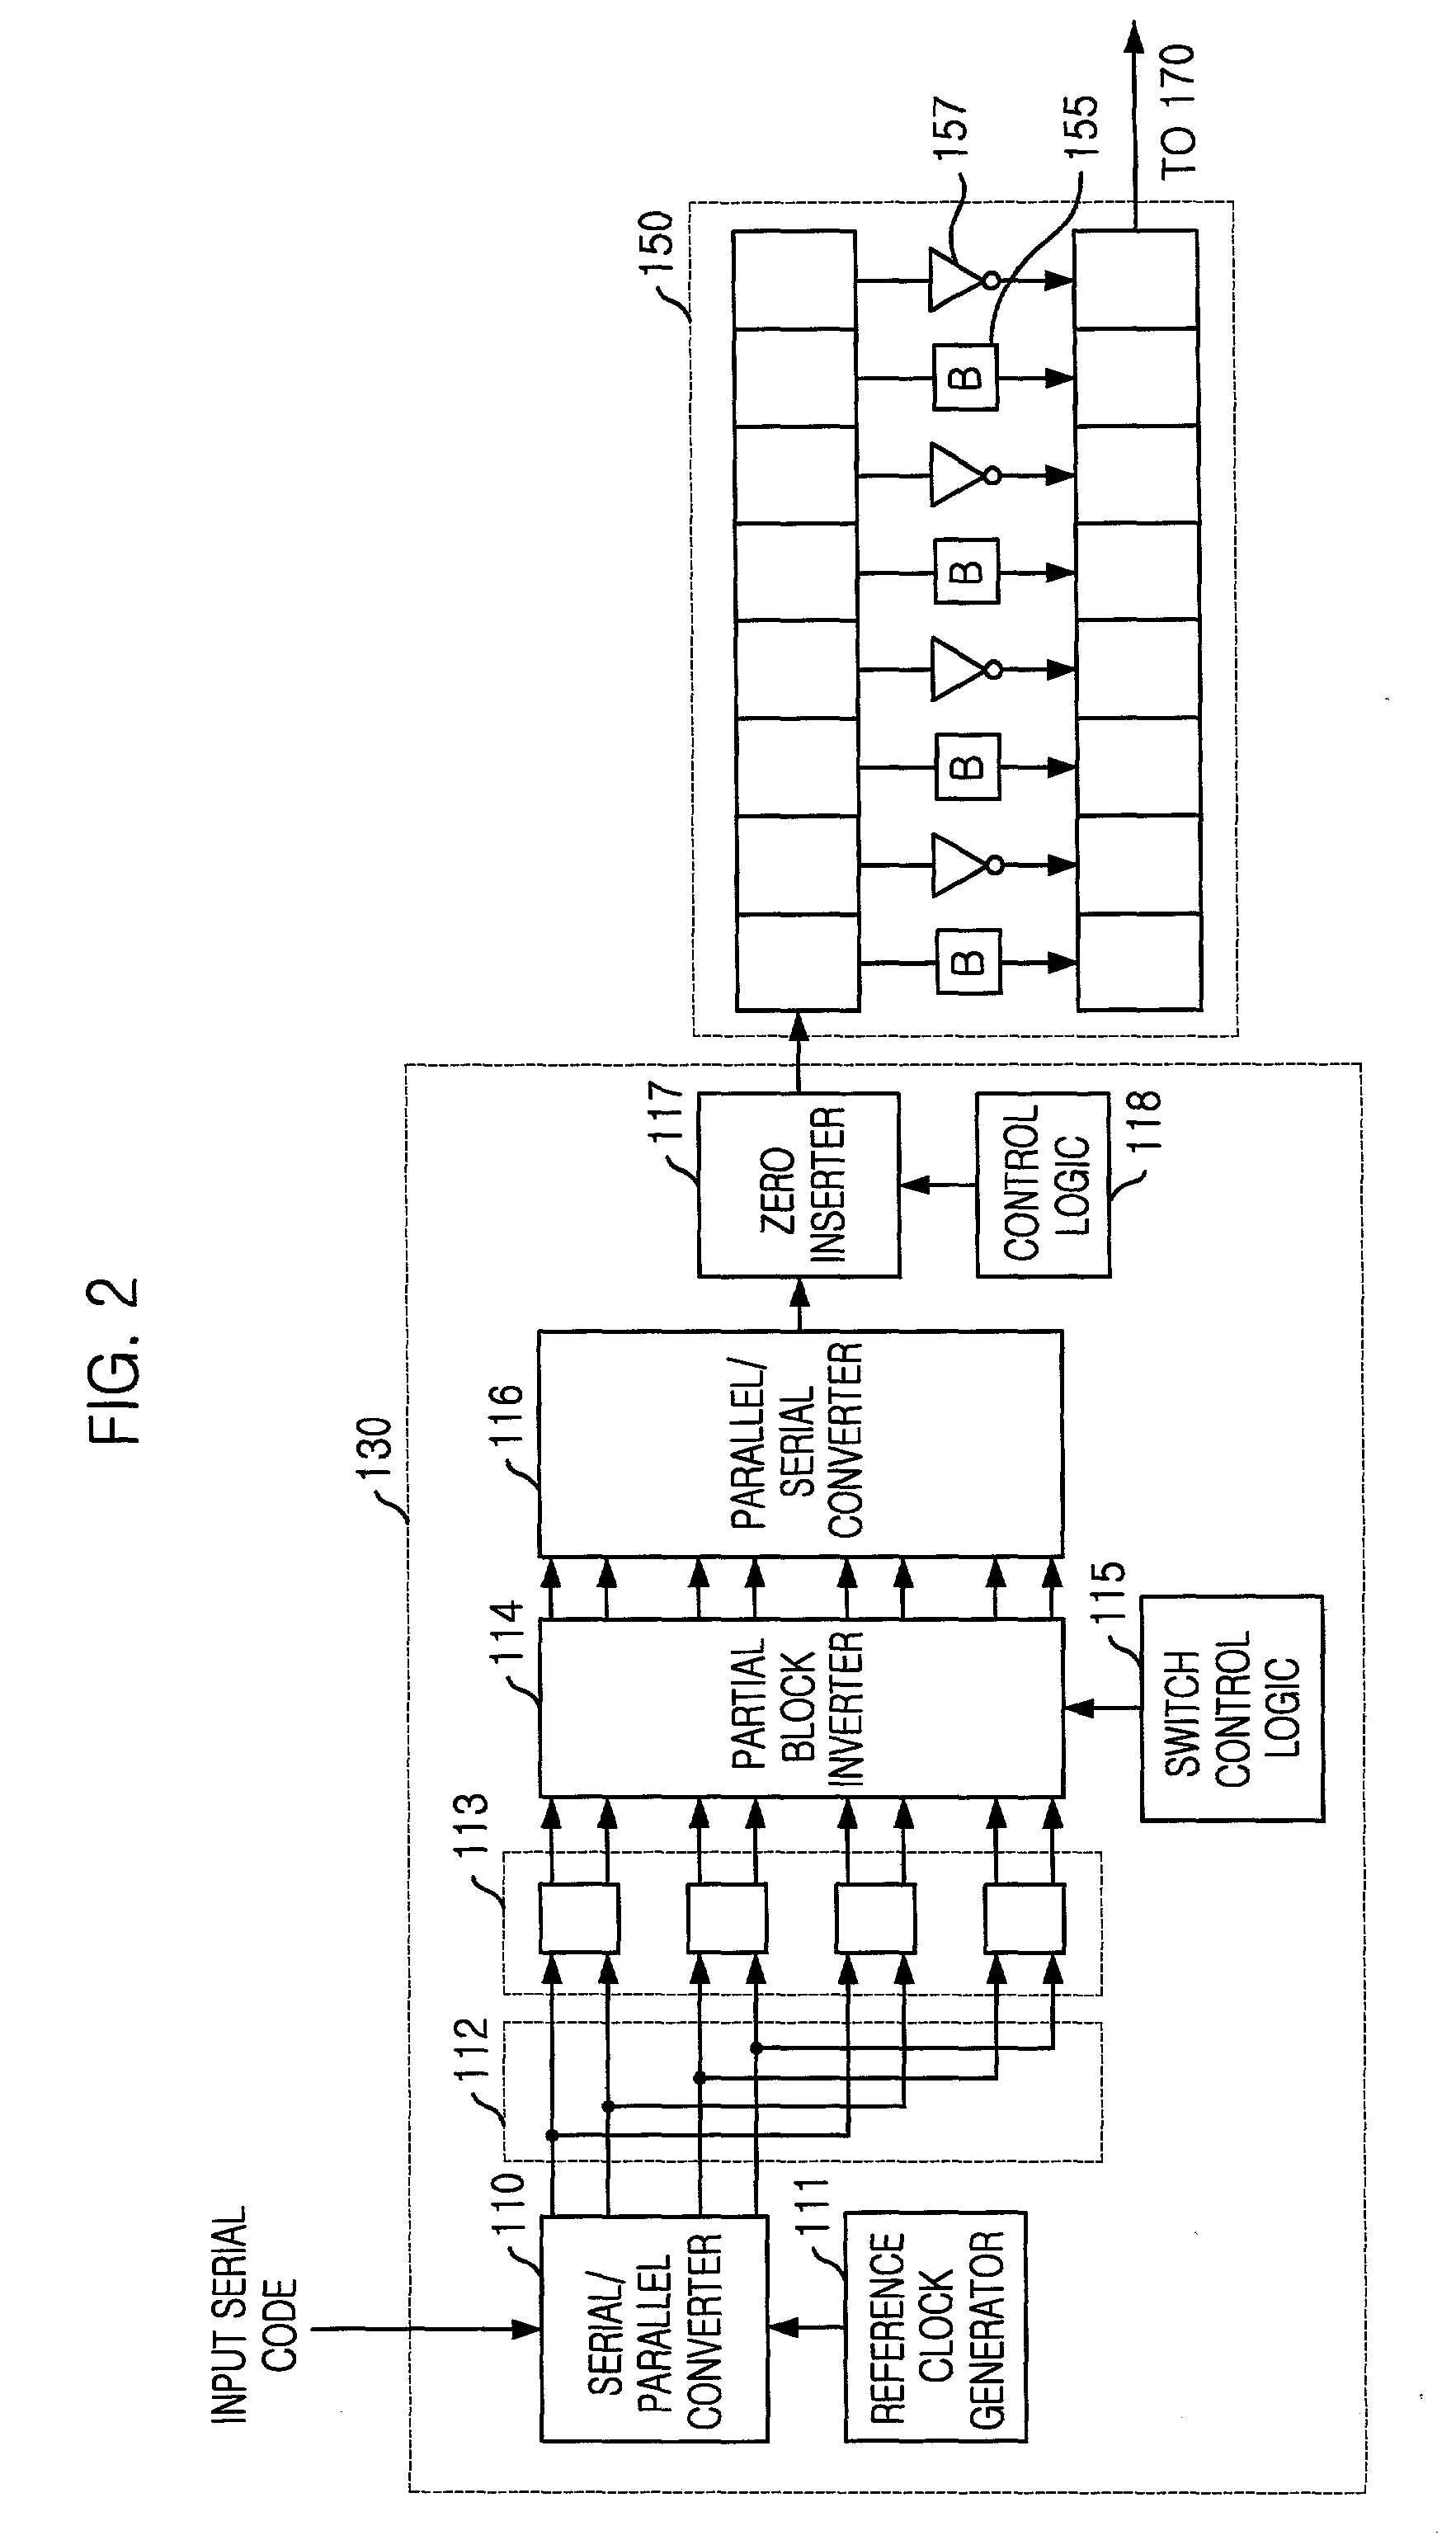 Apparatus for generating ternary spreading codes with zero correlation duration and methd therefor